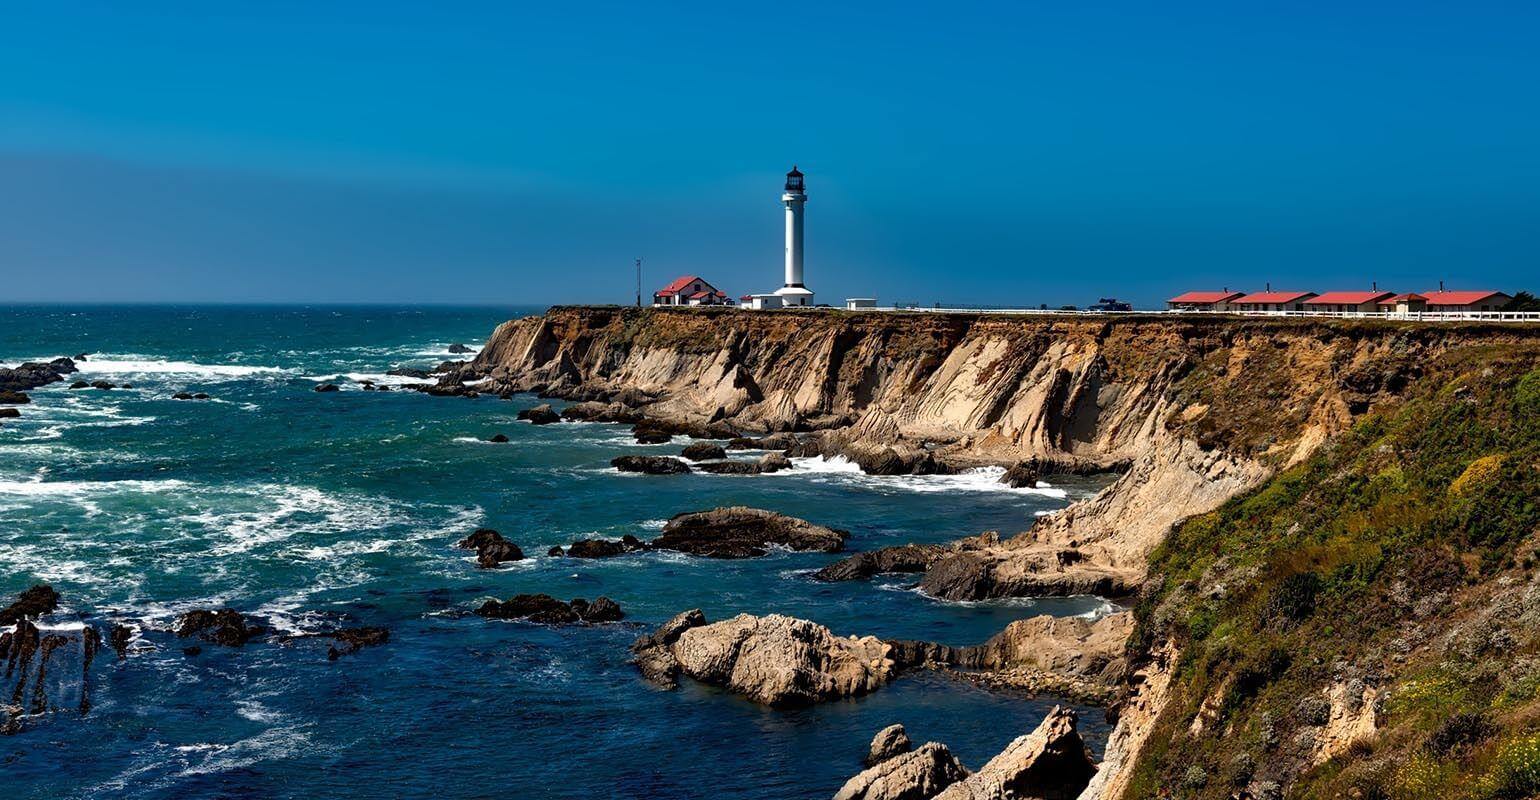 Seaside lighthouse landscape image sharpened and enhanced with better clarity and details by Fotors free online image sharpener